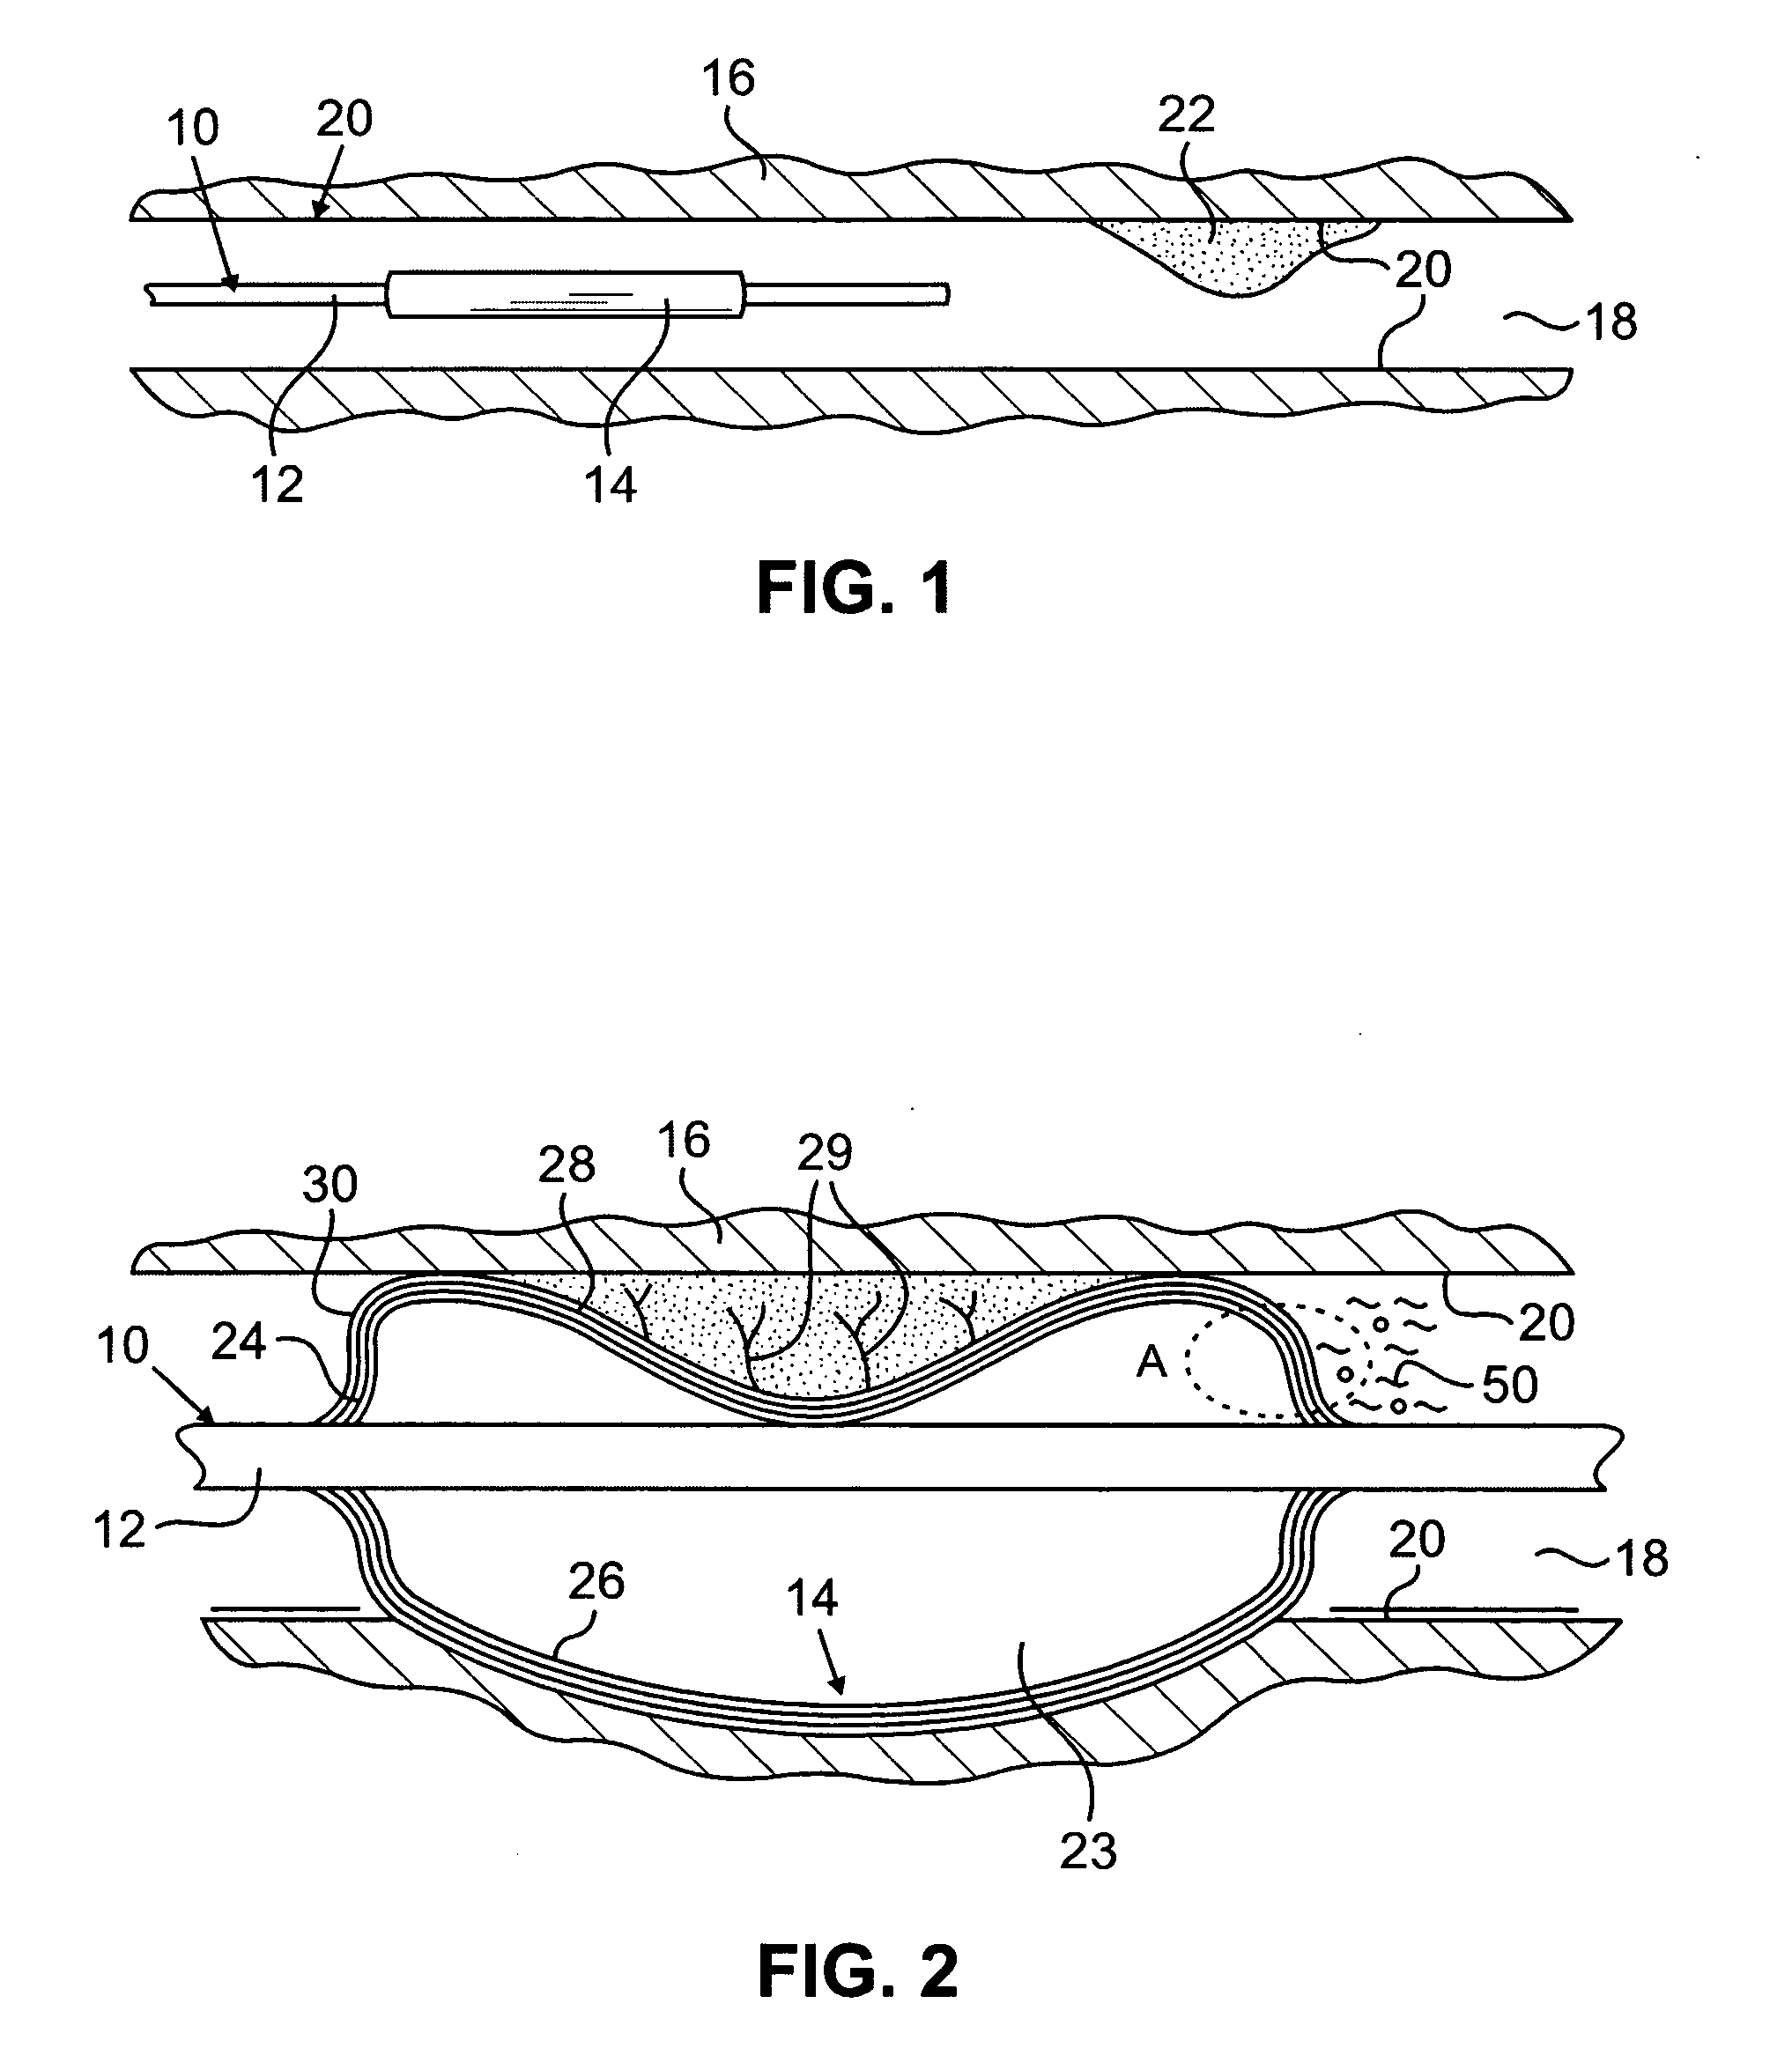 Methods and devices having electrically actuatable surfaces